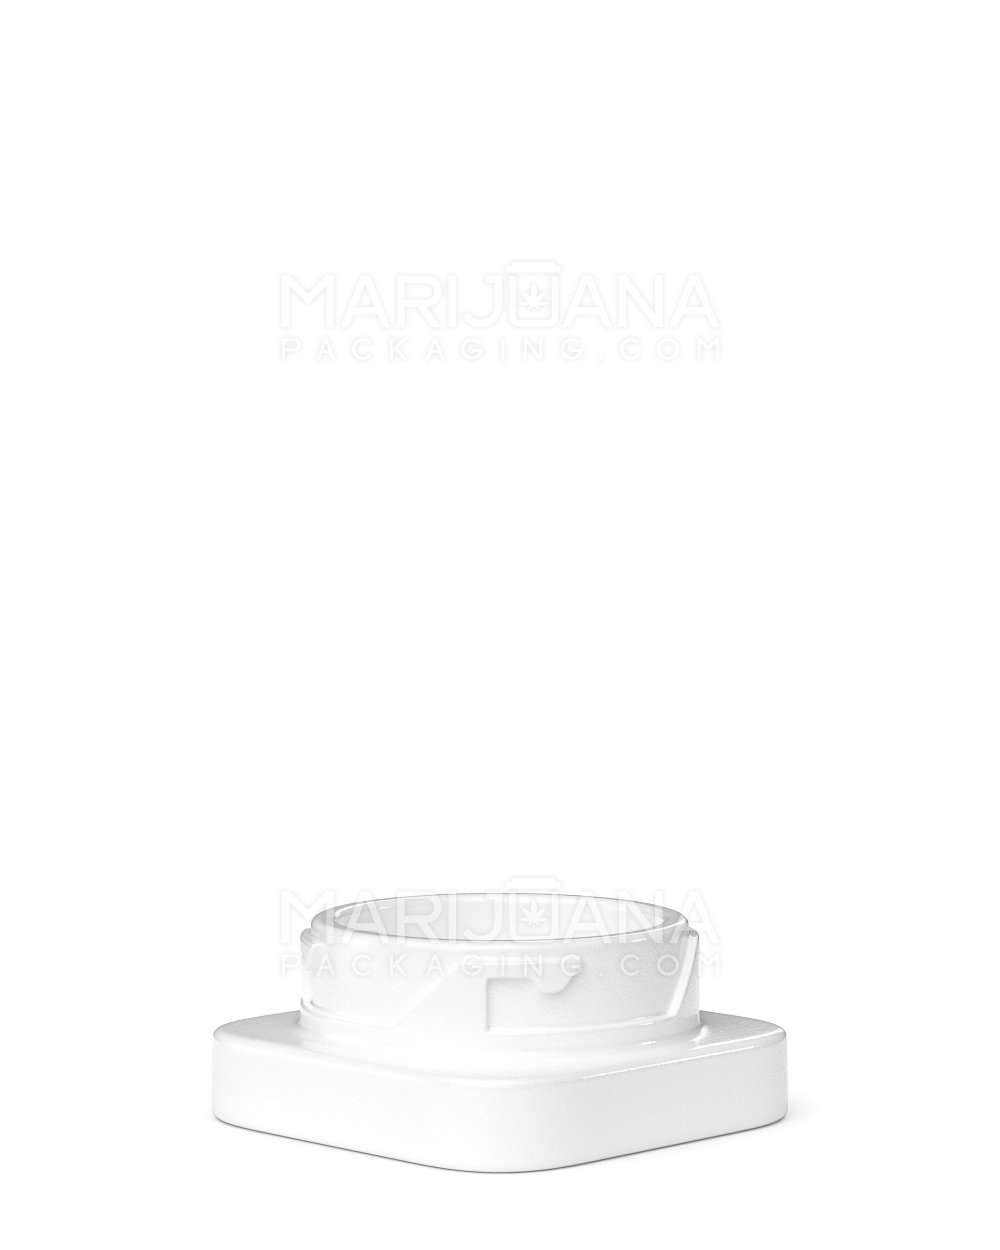 Child Resistant | Qube White Glass Concentrate Jar w/ White Cap | 38mm - 9mL - 250 Count - 2